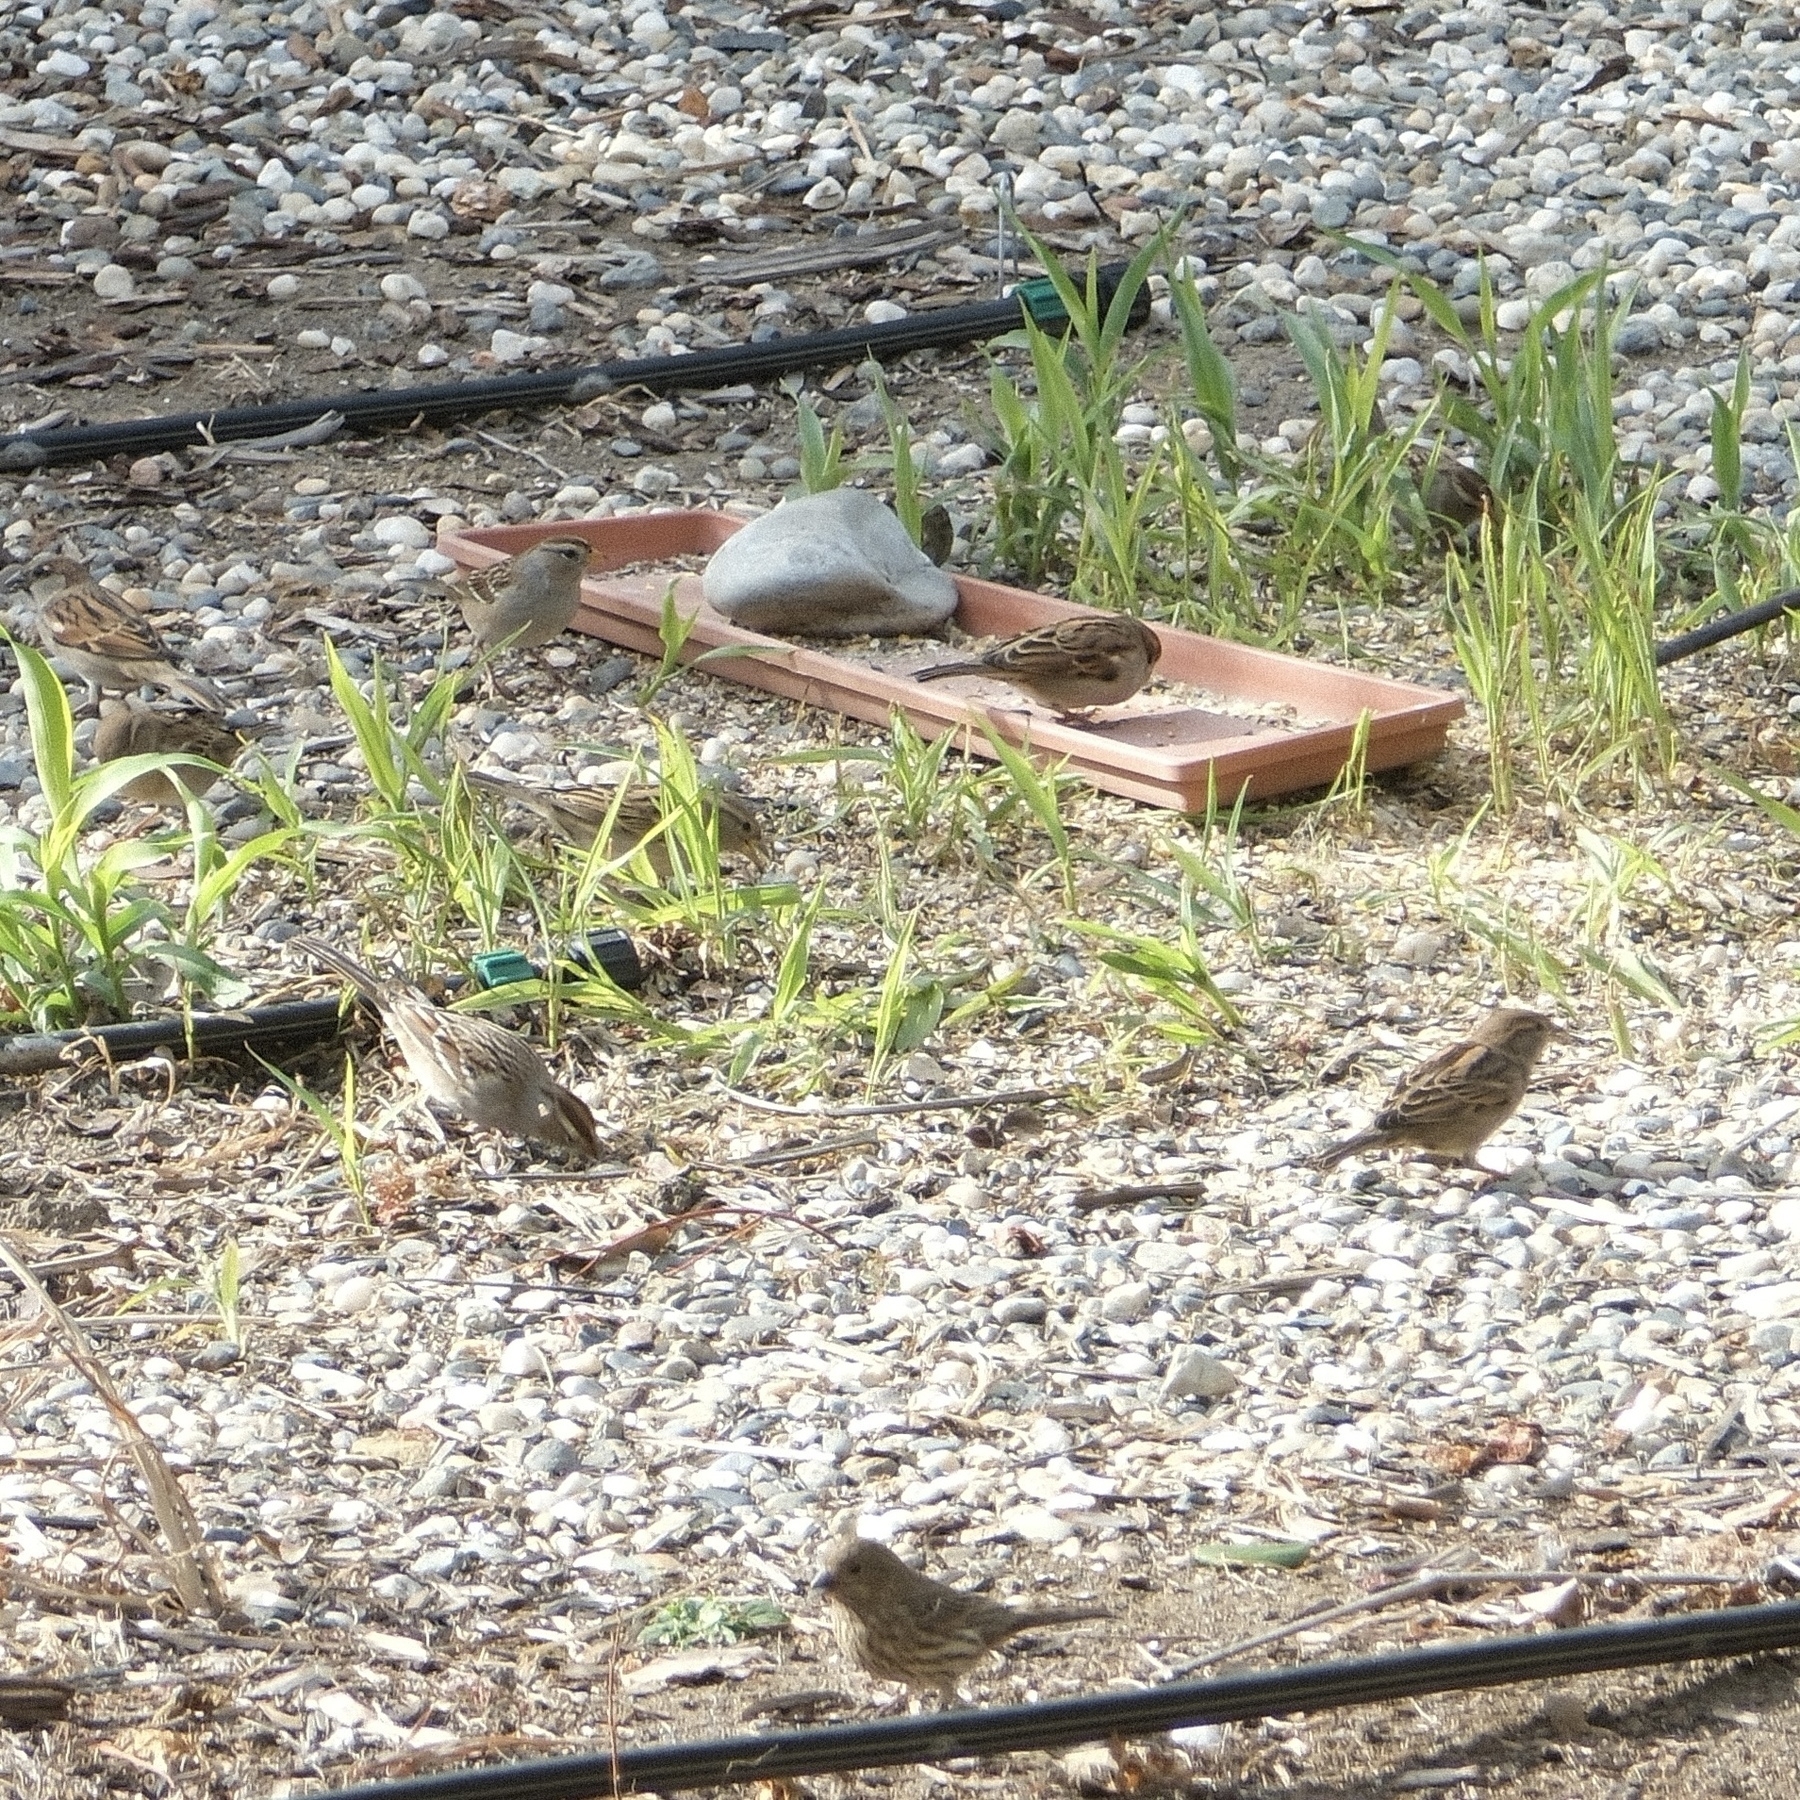 House sparrows foraging for bird seeds in a gravel area below a feeder.